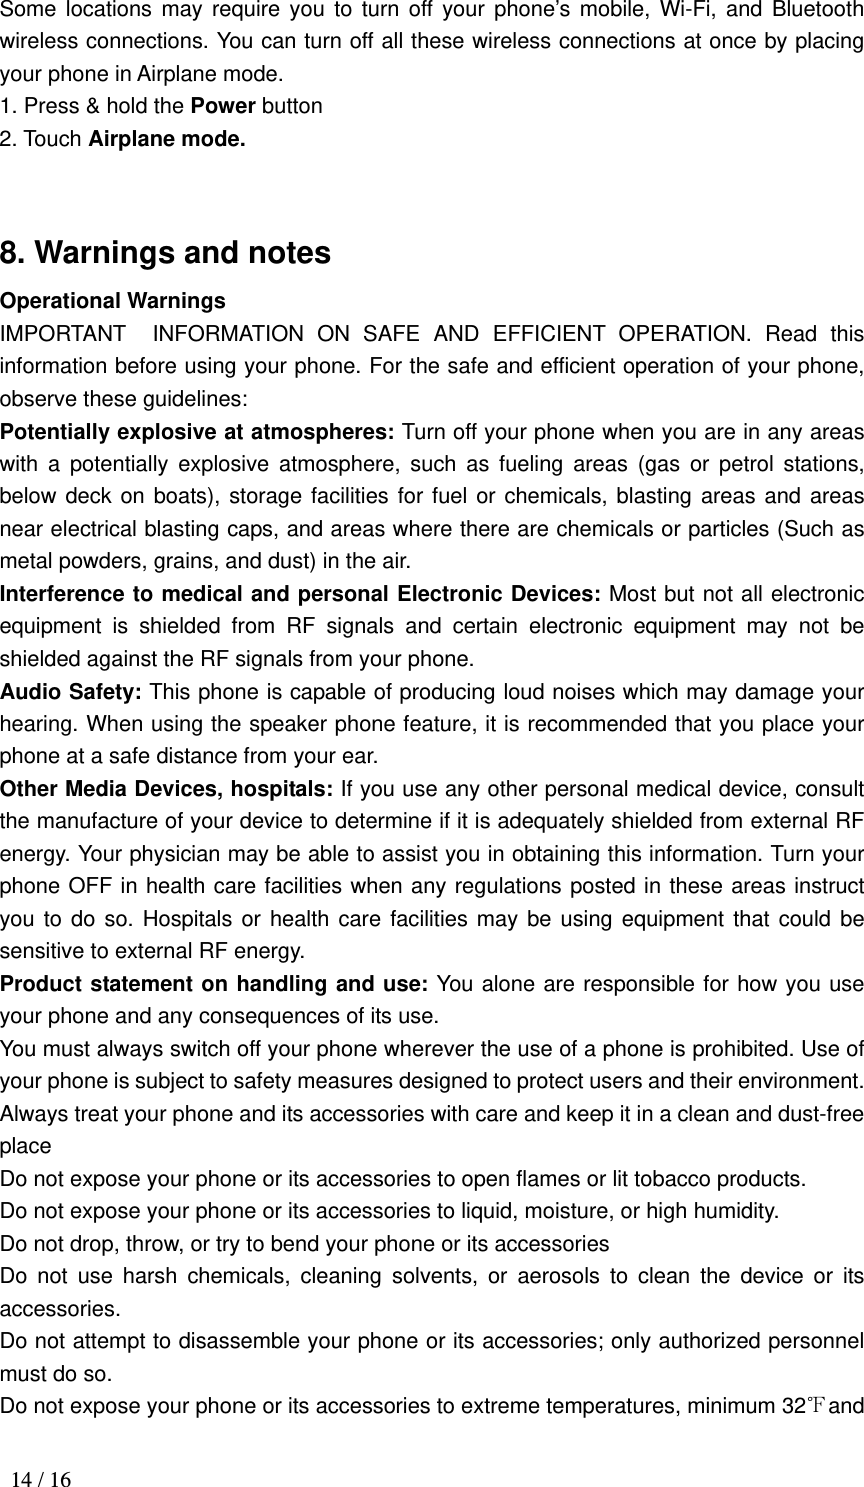  14 / 16 Some locations may require you to turn off your phone’s mobile, Wi-Fi, and Bluetooth wireless connections. You can turn off all these wireless connections at once by placing your phone in Airplane mode. 1. Press &amp; hold the Power button 2. Touch Airplane mode.  8. Warnings and notes Operational Warnings IMPORTANT INFORMATION ON SAFE AND EFFICIENT OPERATION. Read this information before using your phone. For the safe and efficient operation of your phone, observe these guidelines: Potentially explosive at atmospheres: Turn off your phone when you are in any areas with a potentially explosive atmosphere, such as fueling areas (gas or petrol stations, below deck on boats), storage facilities for fuel or chemicals, blasting areas and areas near electrical blasting caps, and areas where there are chemicals or particles (Such as metal powders, grains, and dust) in the air. Interference to medical and personal Electronic Devices: Most but not all electronic equipment is shielded from RF signals and certain electronic equipment may not be shielded against the RF signals from your phone. Audio Safety: This phone is capable of producing loud noises which may damage your hearing. When using the speaker phone feature, it is recommended that you place your phone at a safe distance from your ear. Other Media Devices, hospitals: If you use any other personal medical device, consult the manufacture of your device to determine if it is adequately shielded from external RF energy. Your physician may be able to assist you in obtaining this information. Turn your phone OFF in health care facilities when any regulations posted in these areas instruct you to do so. Hospitals or health care facilities may be using equipment that could be sensitive to external RF energy. Product statement on handling and use: You alone are responsible for how you use your phone and any consequences of its use. You must always switch off your phone wherever the use of a phone is prohibited. Use of your phone is subject to safety measures designed to protect users and their environment. Always treat your phone and its accessories with care and keep it in a clean and dust-free place Do not expose your phone or its accessories to open flames or lit tobacco products. Do not expose your phone or its accessories to liquid, moisture, or high humidity. Do not drop, throw, or try to bend your phone or its accessories Do not use harsh chemicals, cleaning solvents, or aerosols to clean the device or its accessories. Do not attempt to disassemble your phone or its accessories; only authorized personnel must do so. Do not expose your phone or its accessories to extreme temperatures, minimum 32℉and 